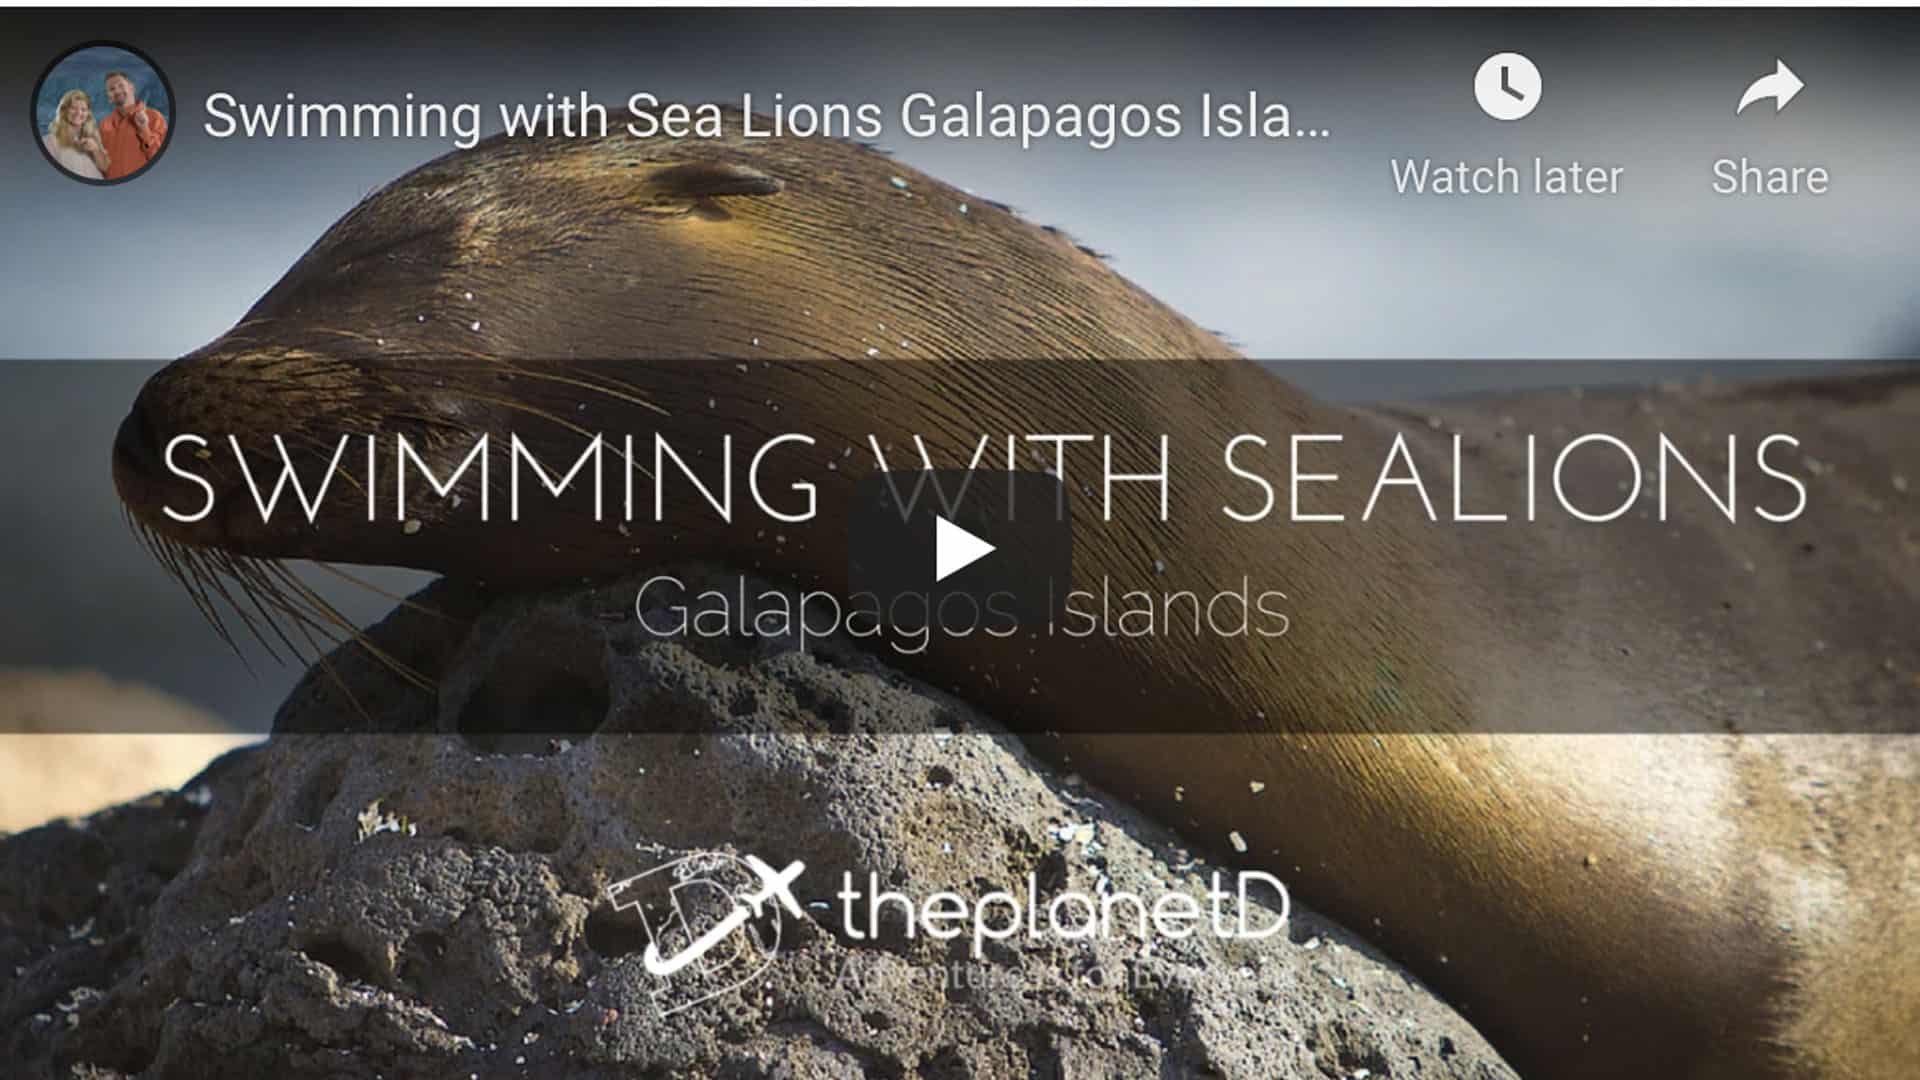 sea lions of the Galapagos Islands